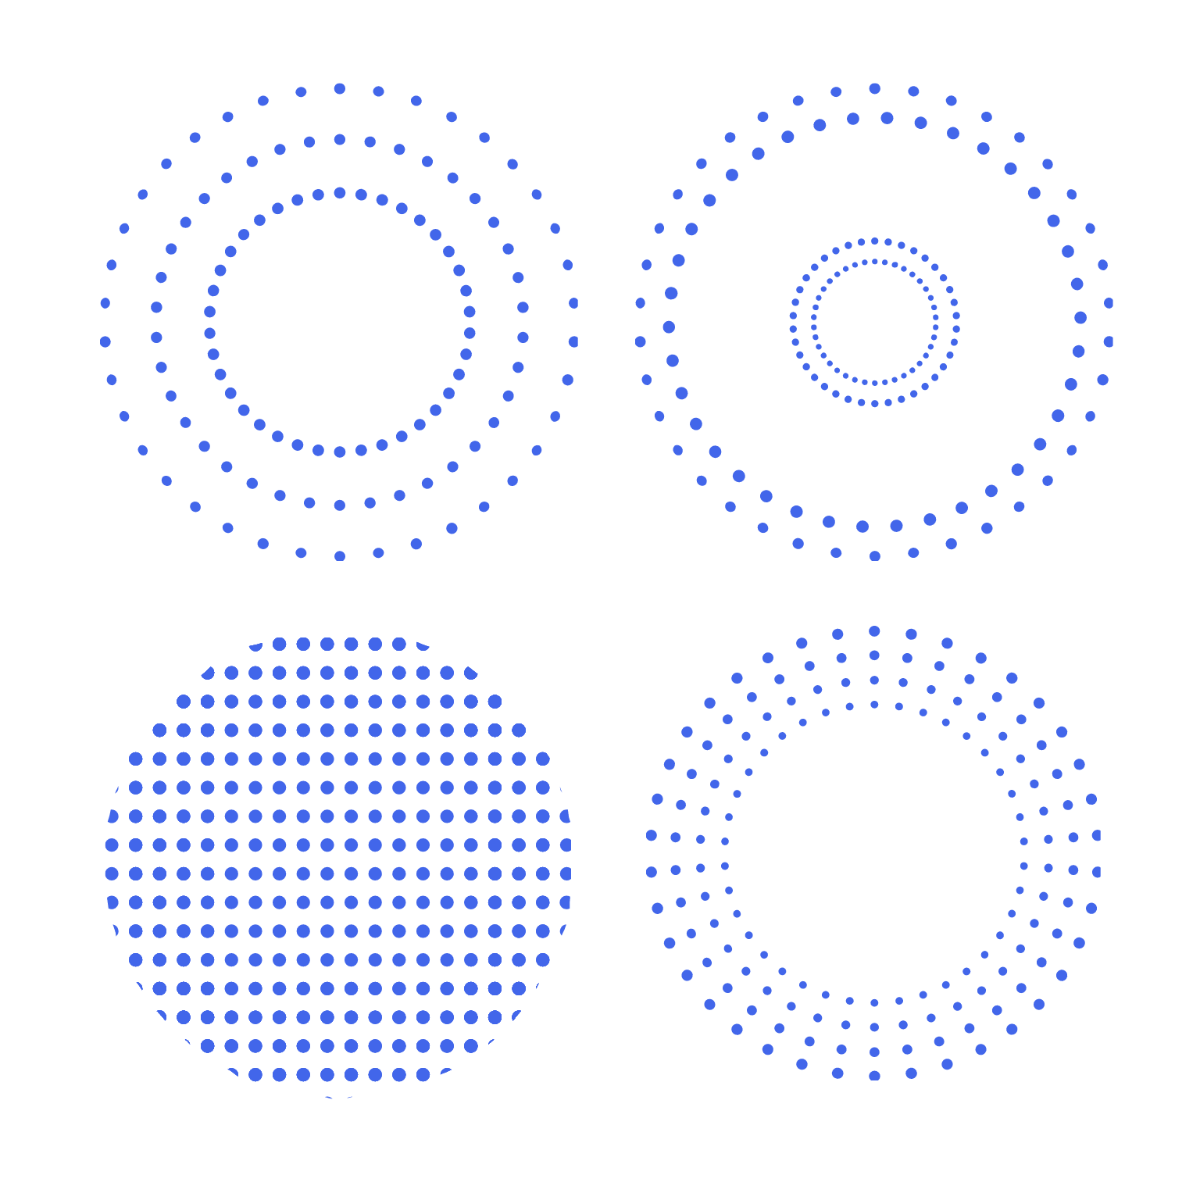 Dotted Circle Vector